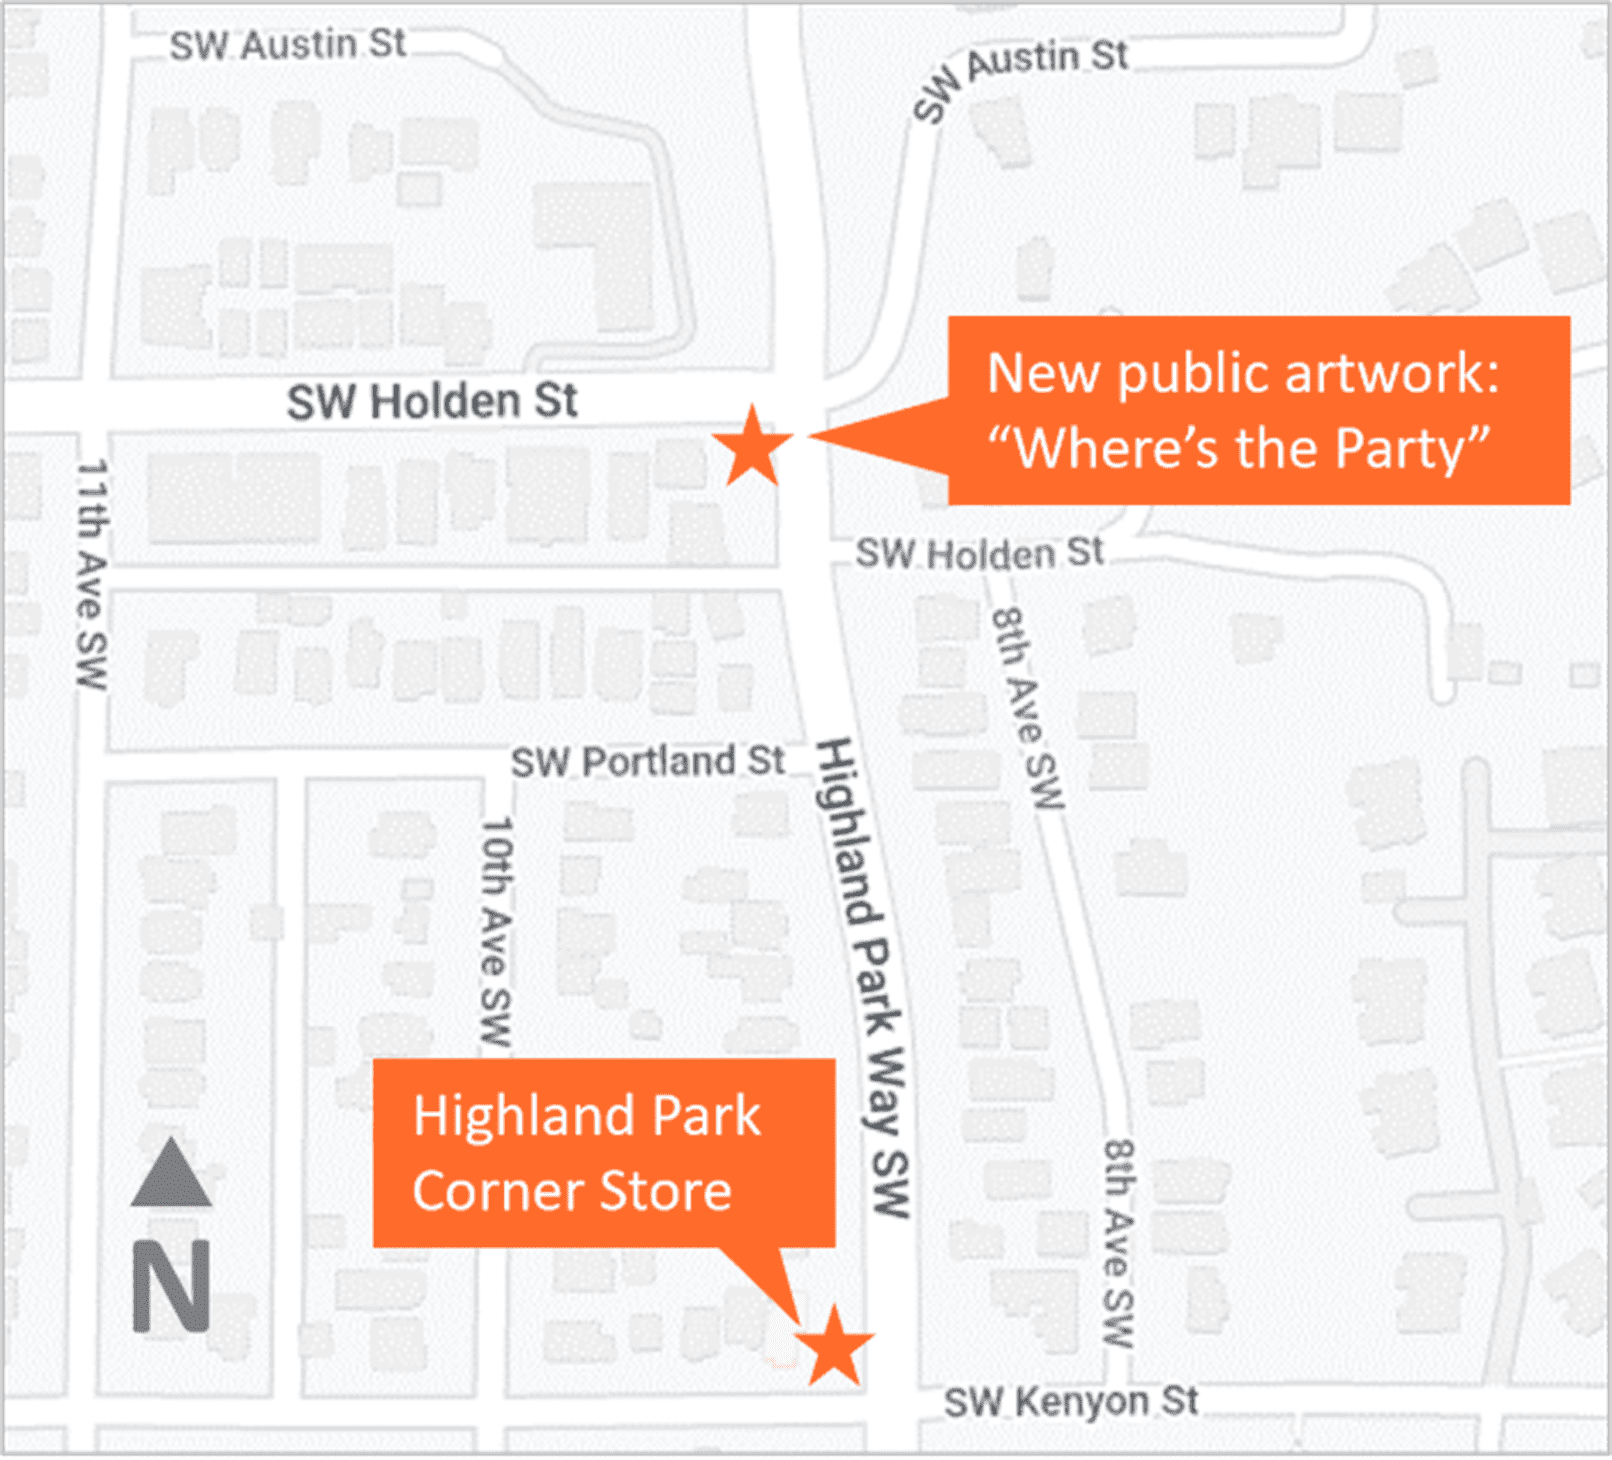 Map showing a new public artwork installation called "Where's the Party" at the corner of SW Holden St and Highland Park Way SW. Also, a community celebration will be held at the Highland Park Corner Store at the corner of SW Kenyon St and Highland Park Way SW.